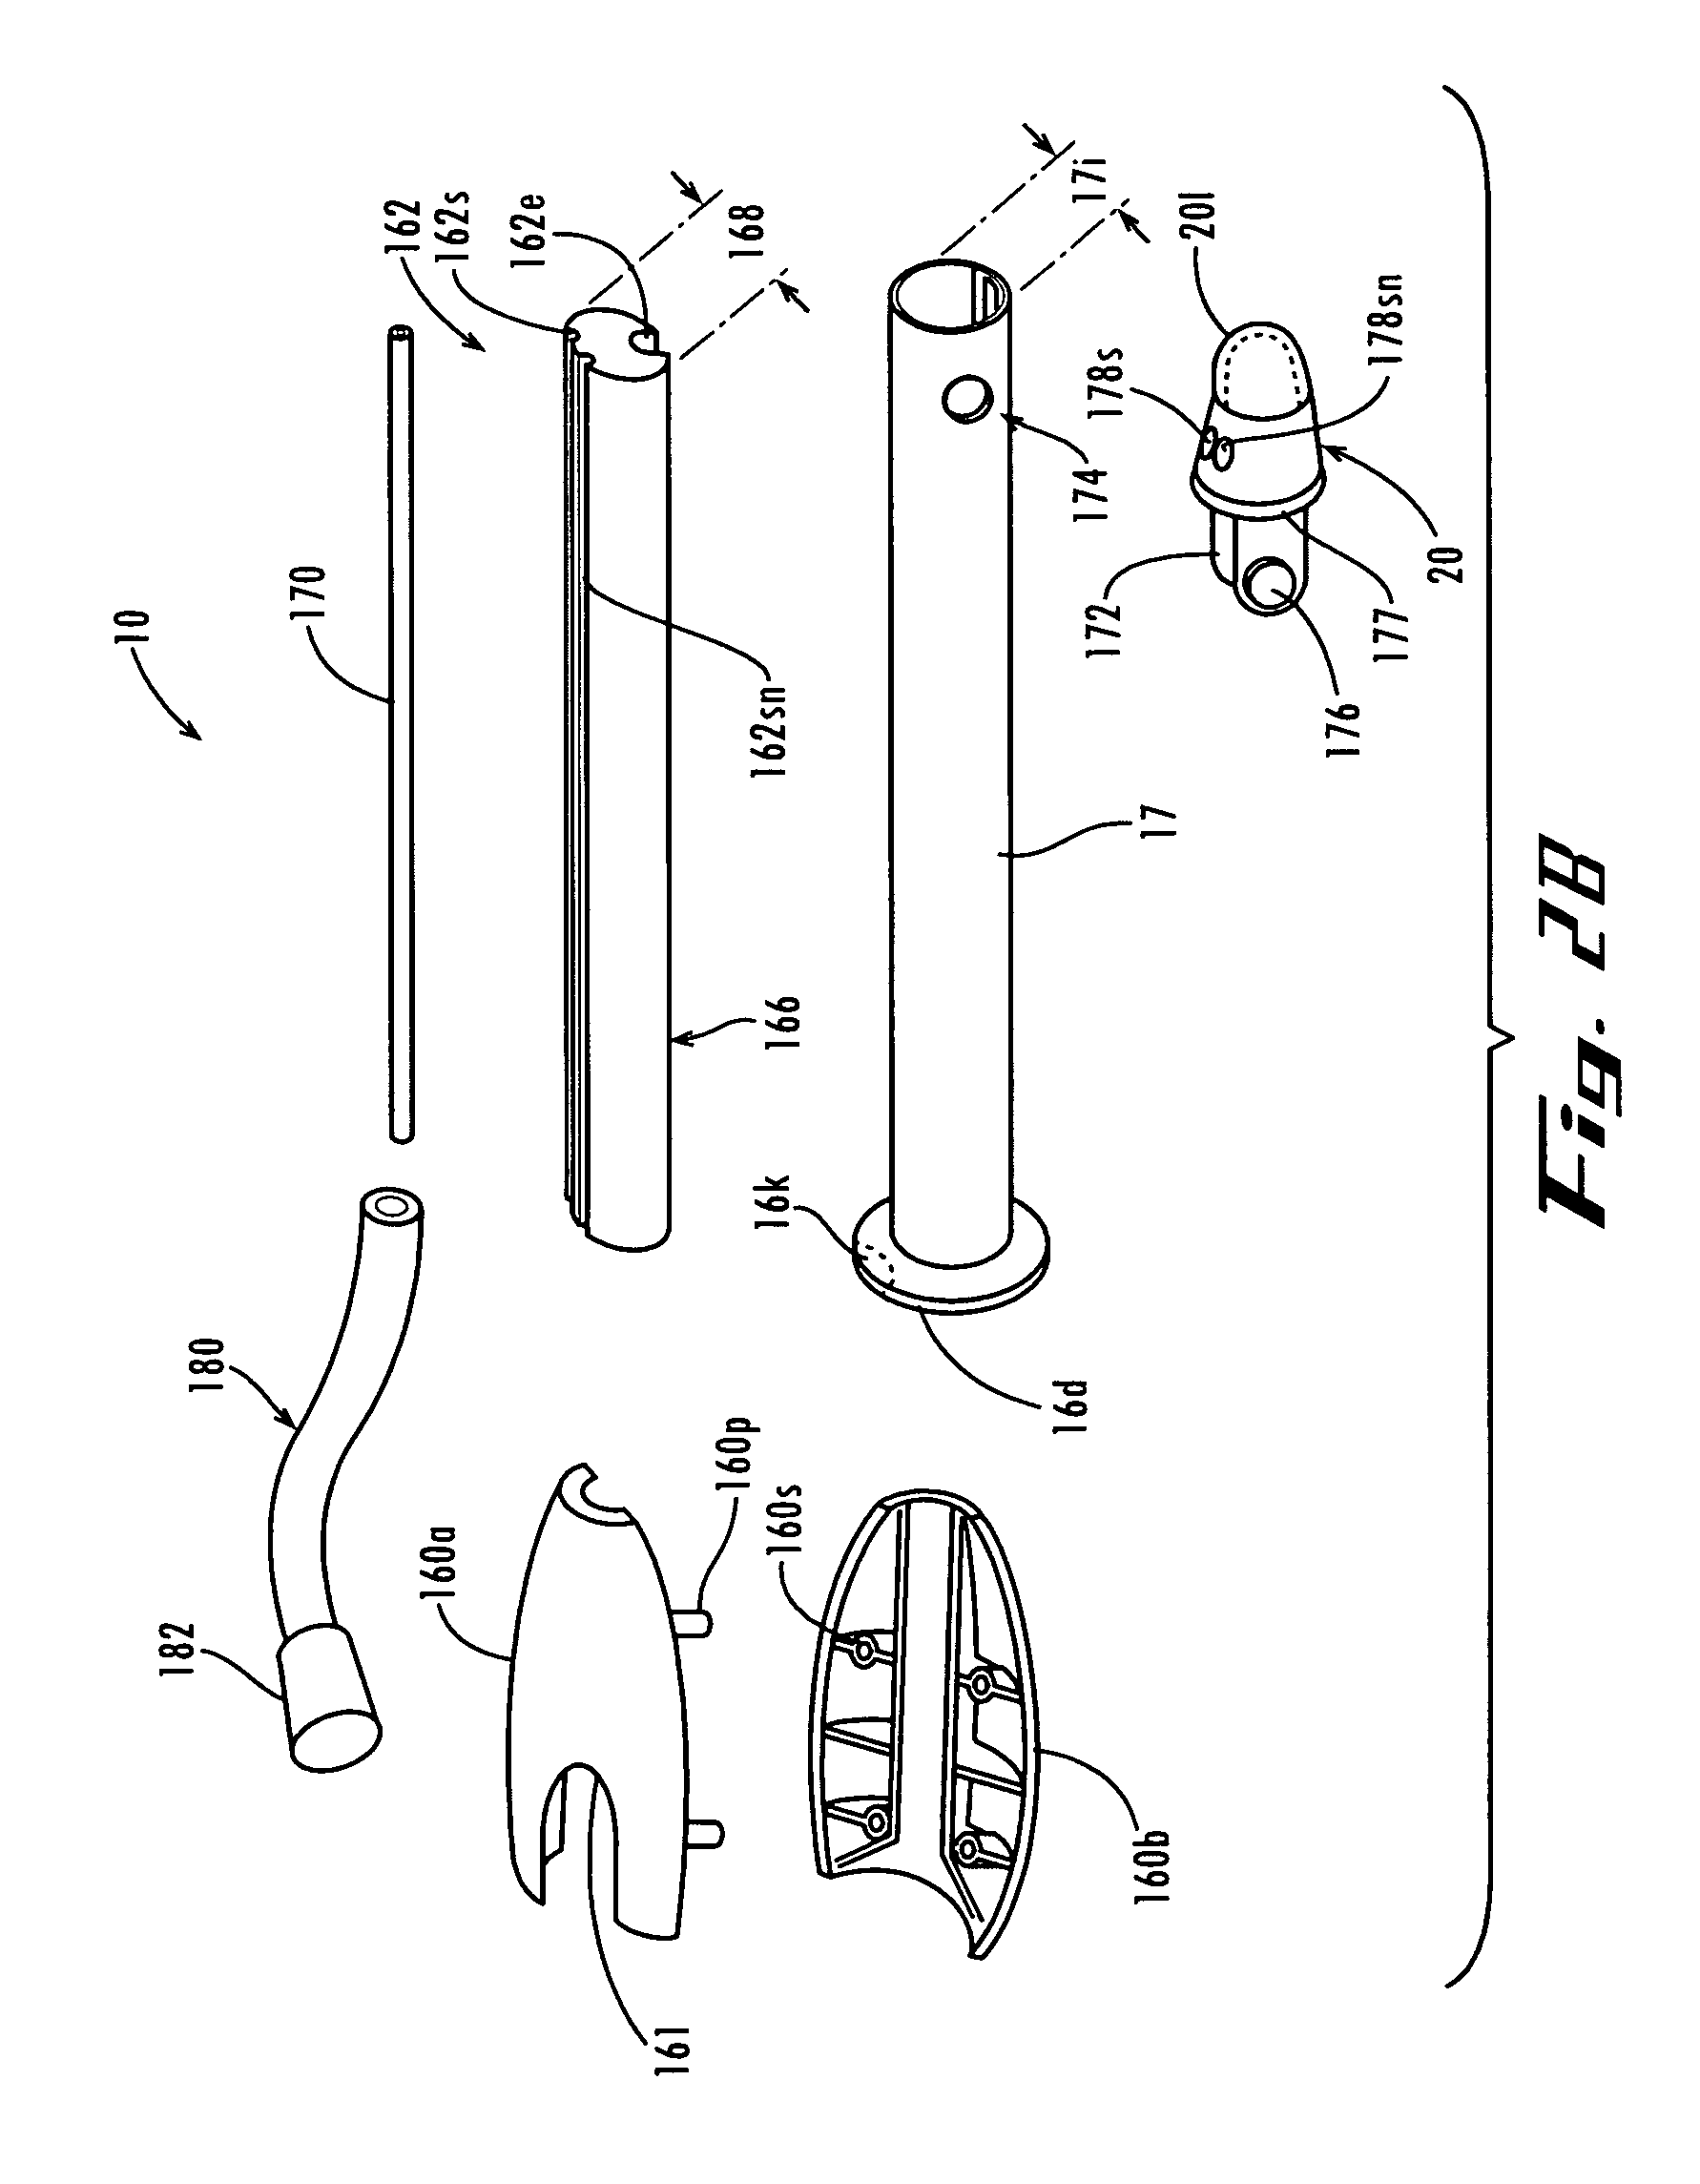 Apparatus and methods for performing minimally-invasive surgical procedures